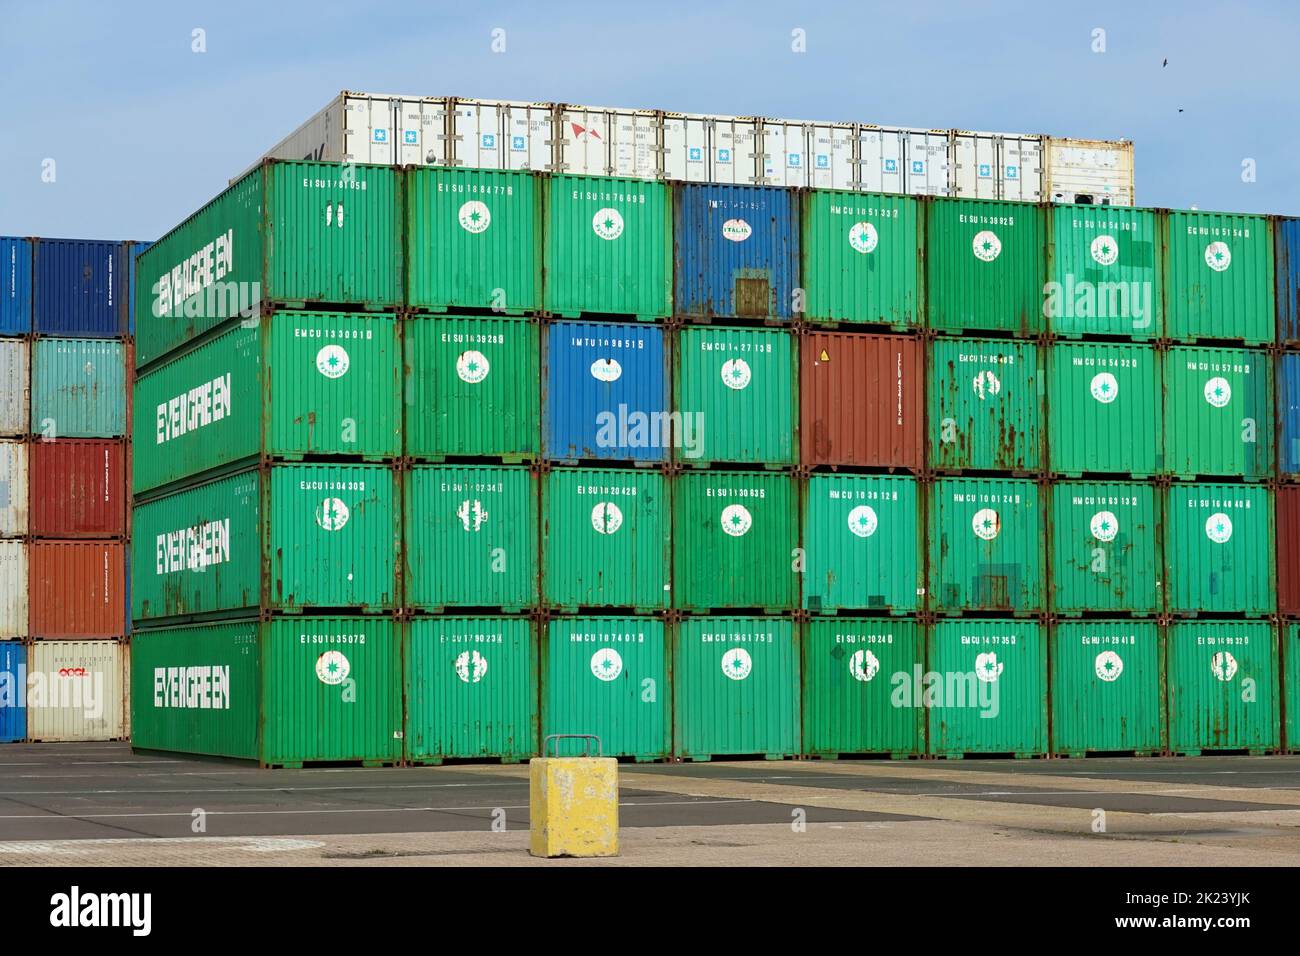 Felixstowe, Suffolk, UK - 22 September 2022 : Containers stacked at the port. Stock Photo